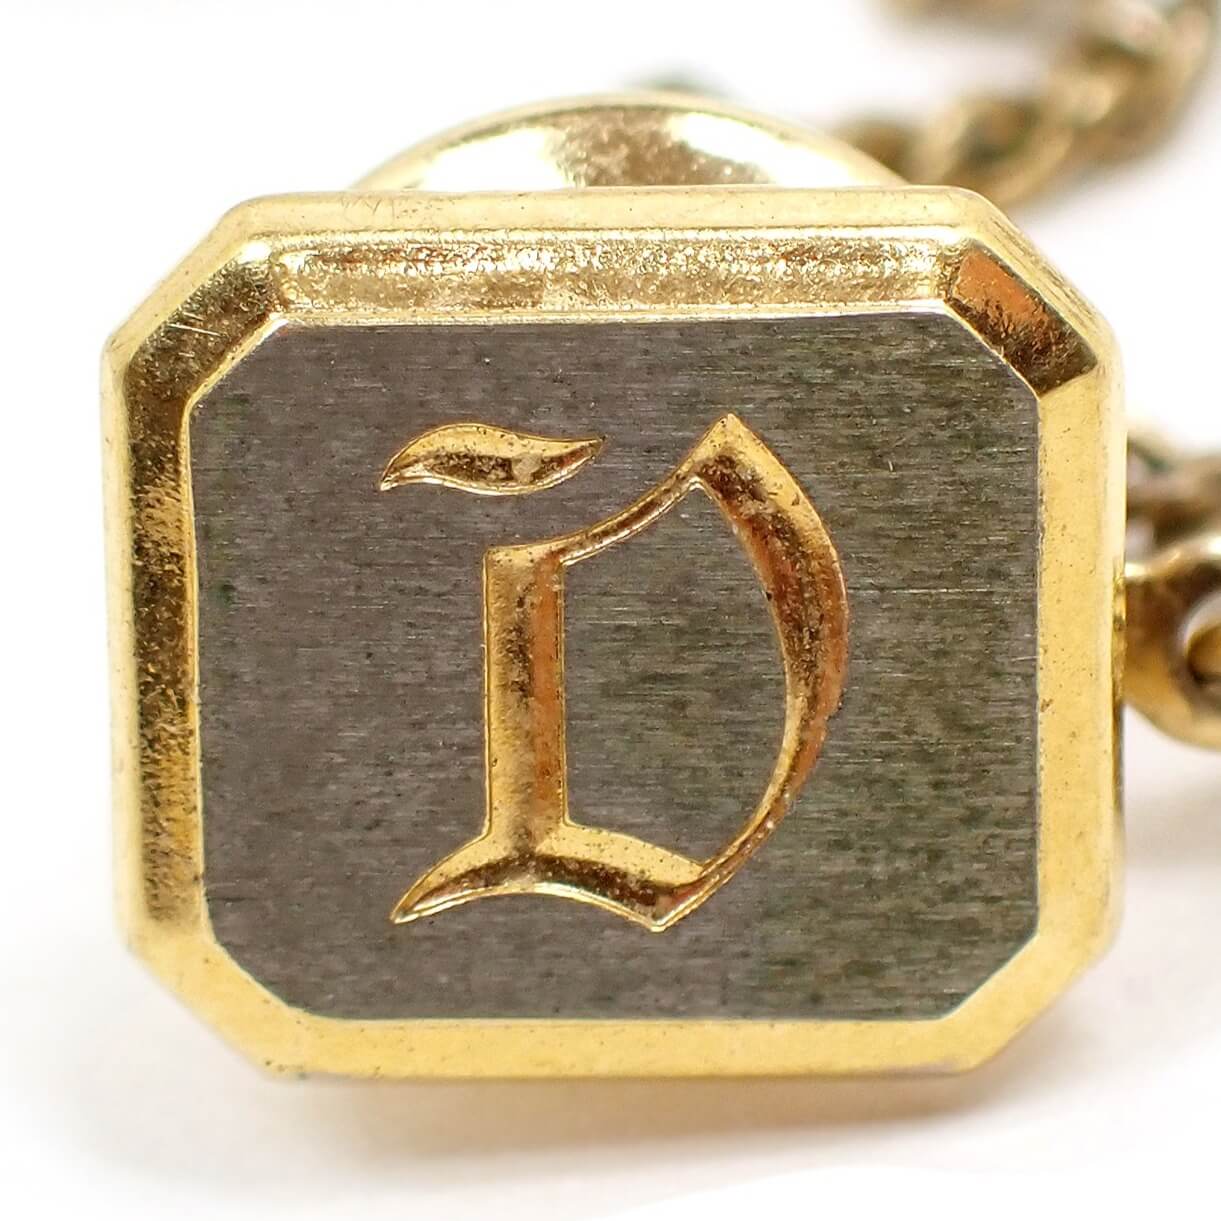 Enlarged front view of the Mid Century vintage initial tie tack. It is octagon shaped with brushed matte silver tone front. The edge and clutch are gold tone plated in color. There is a gold tone fancy style block letter D engraved on the front.